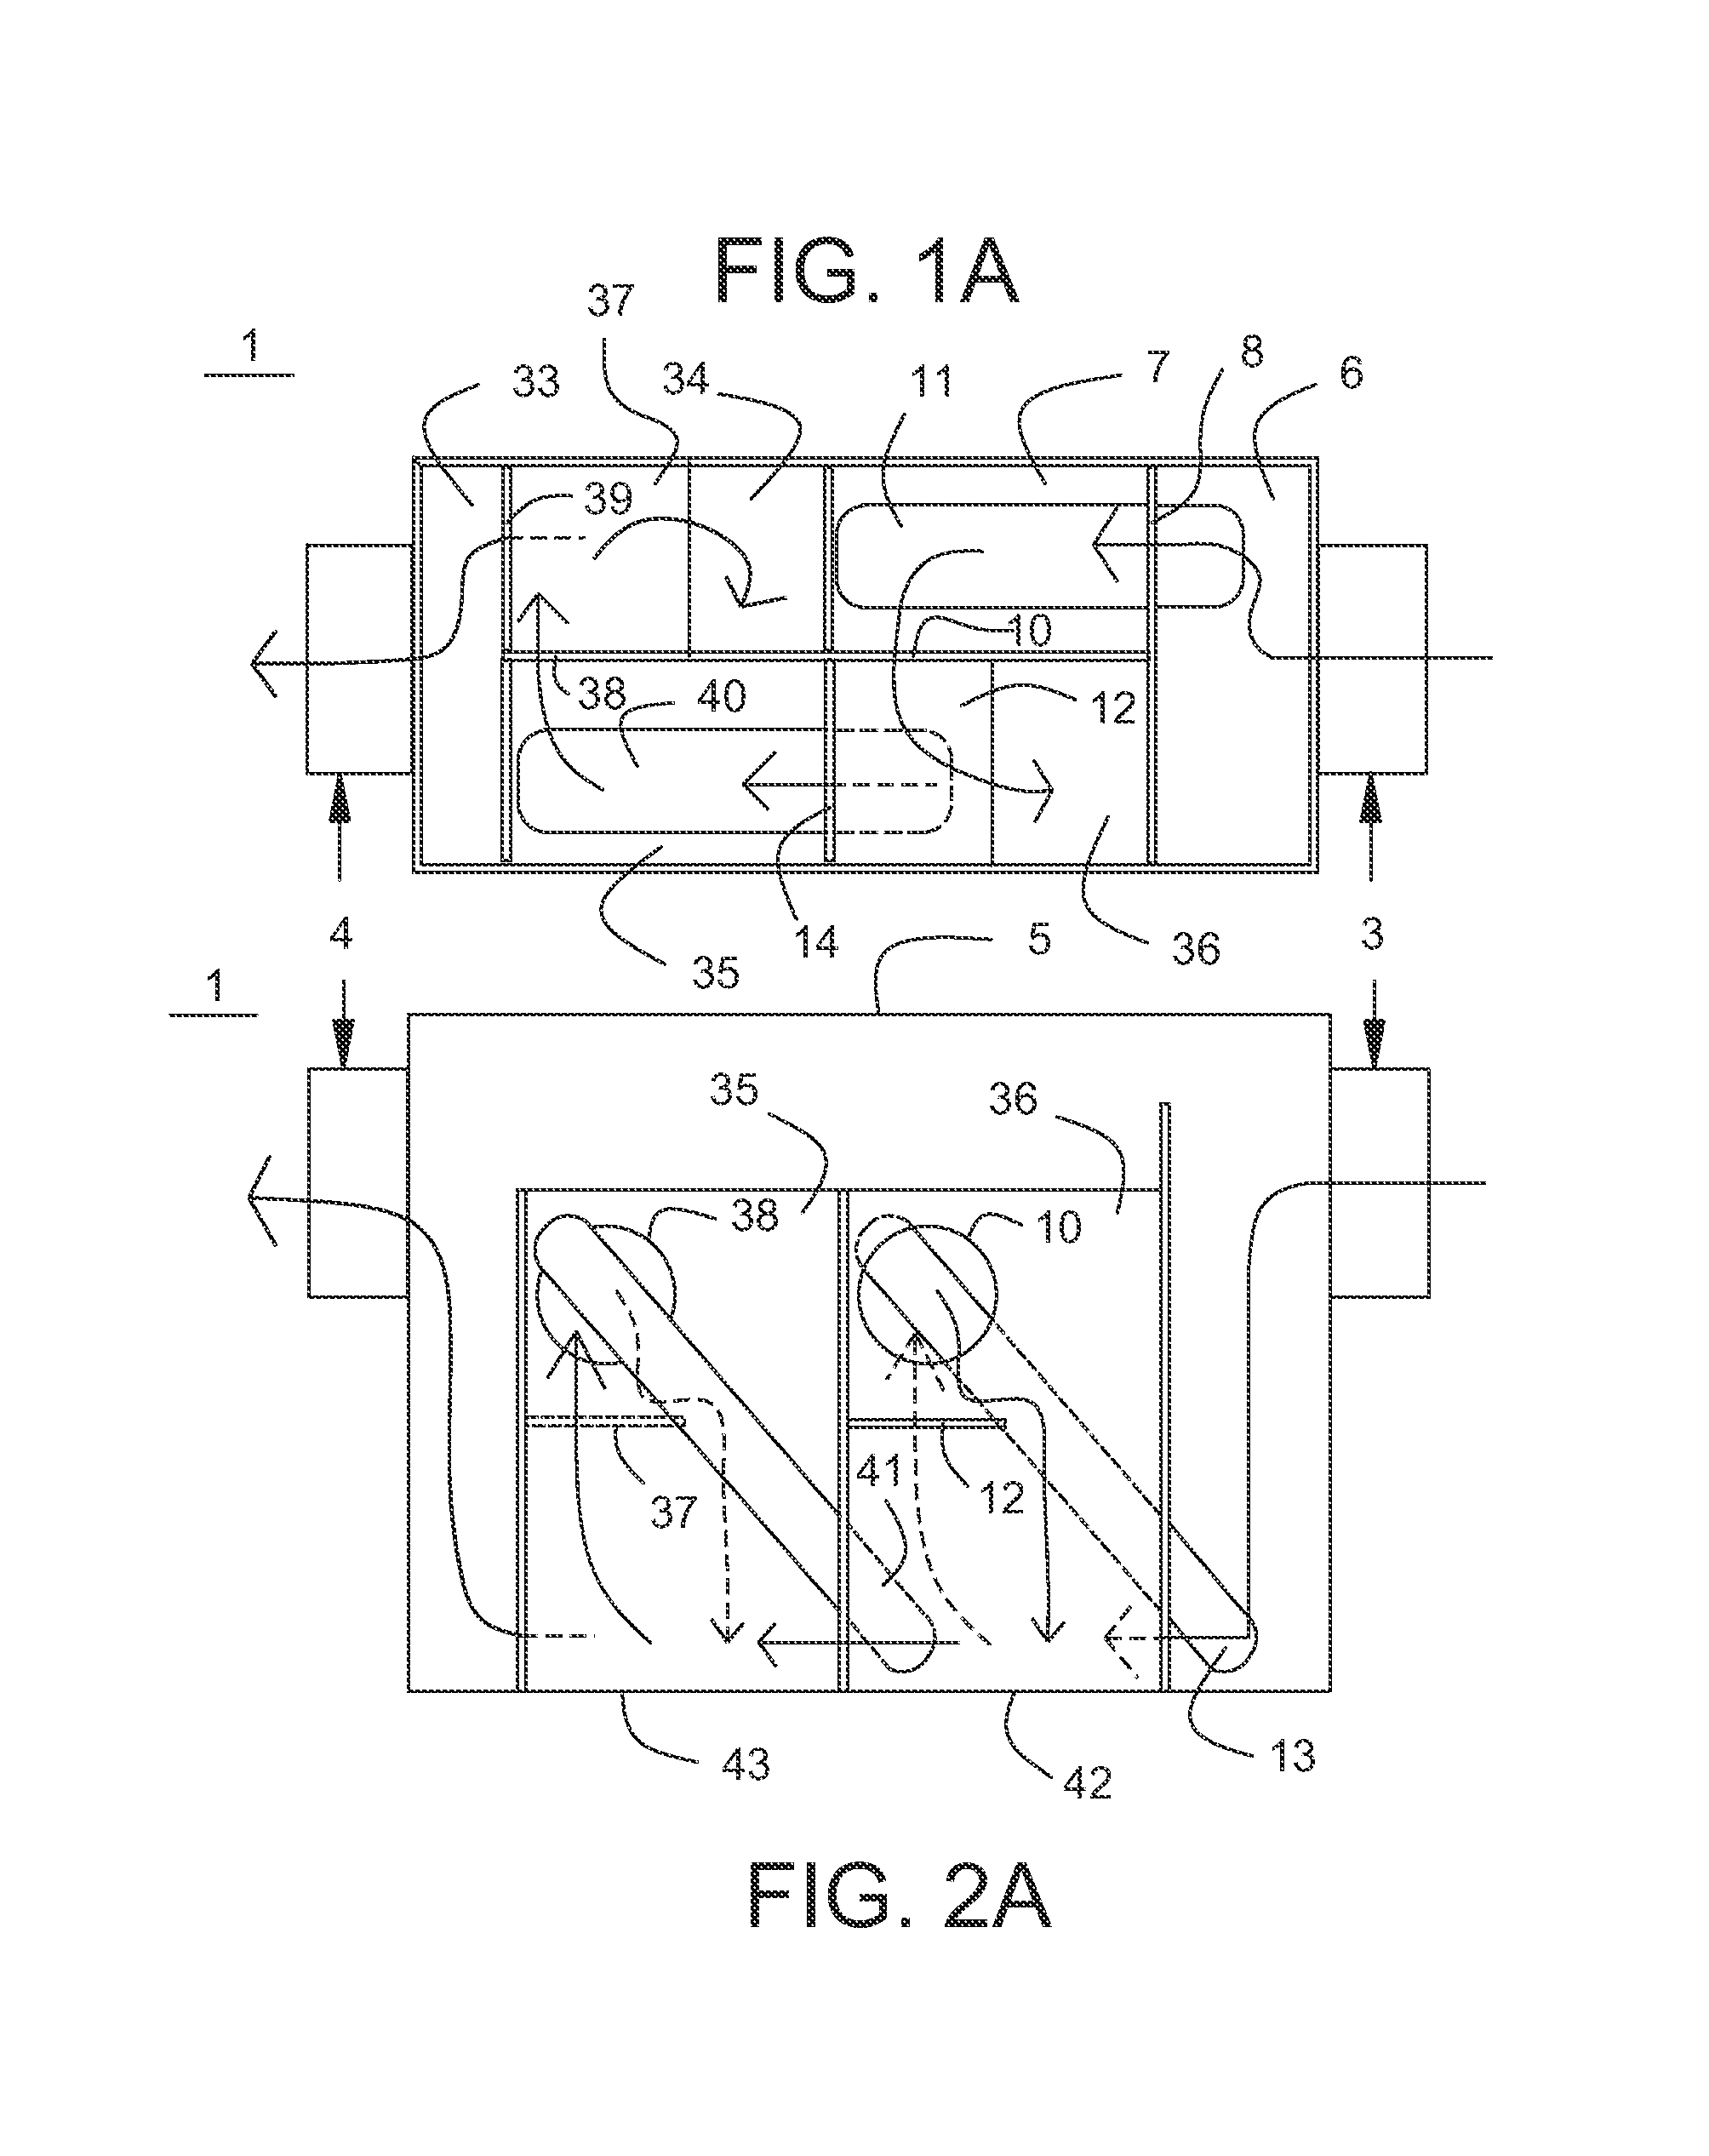 Waste water processing system and method